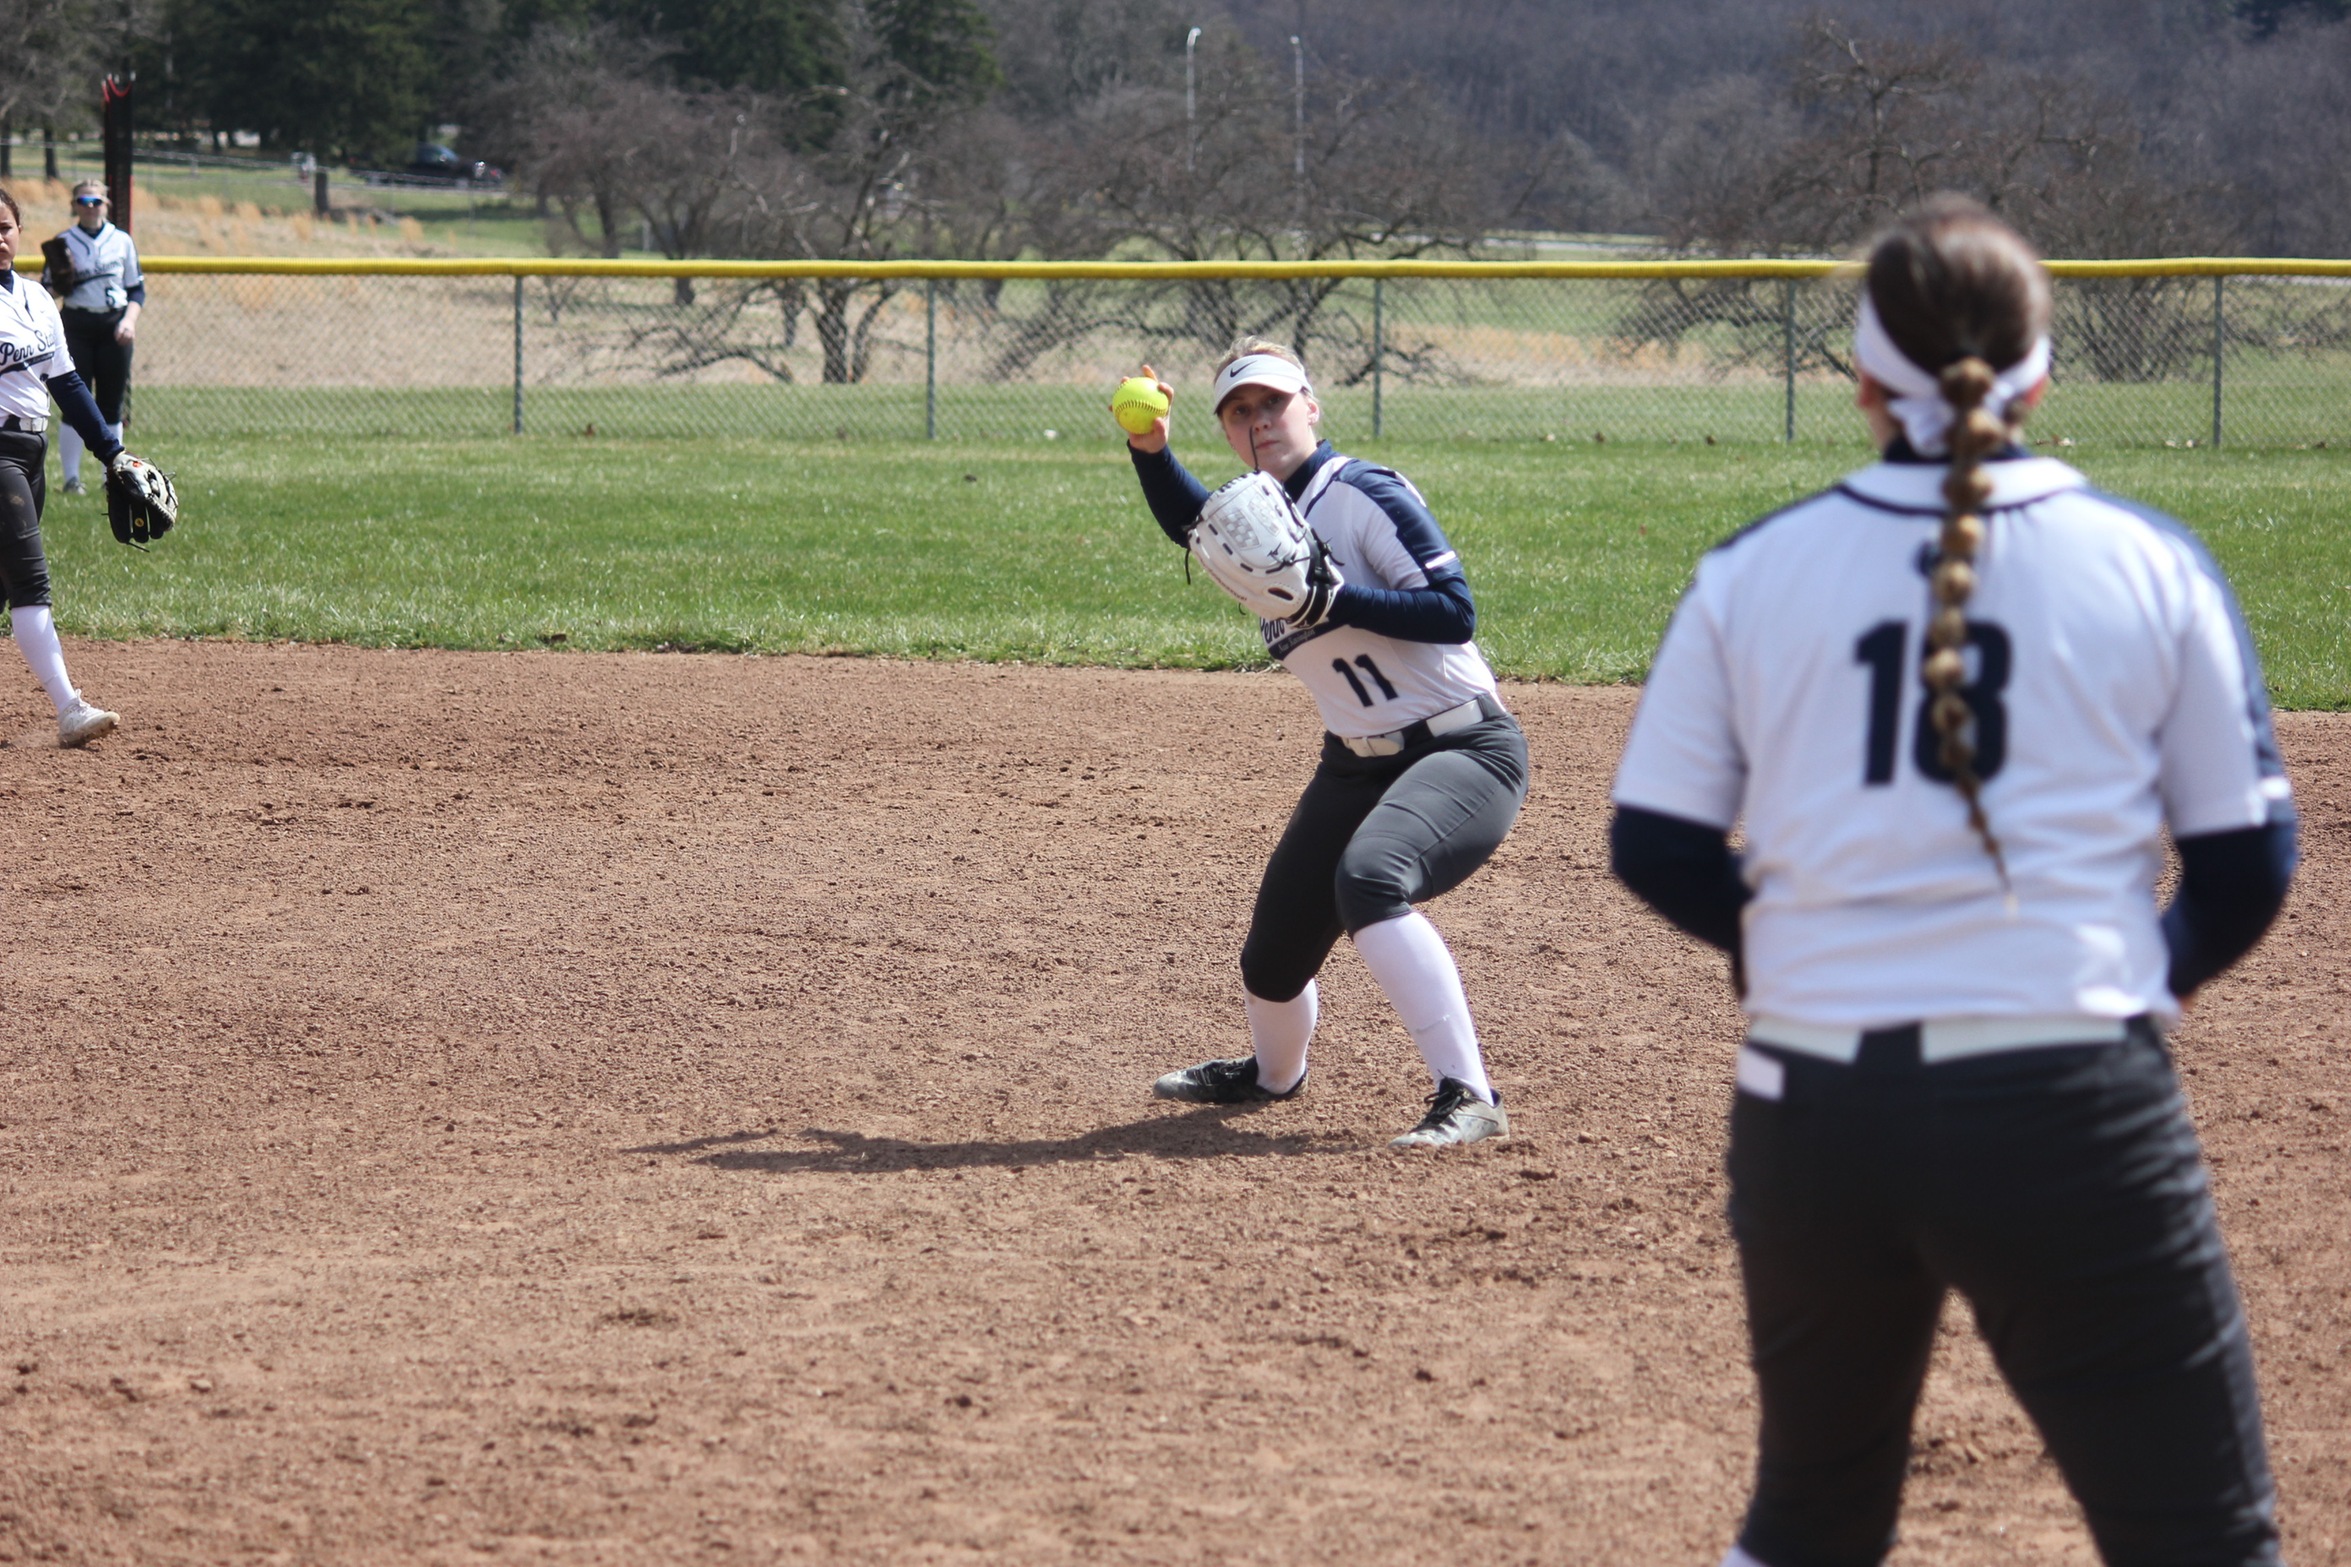 Courtney Biswick putting the ball into play